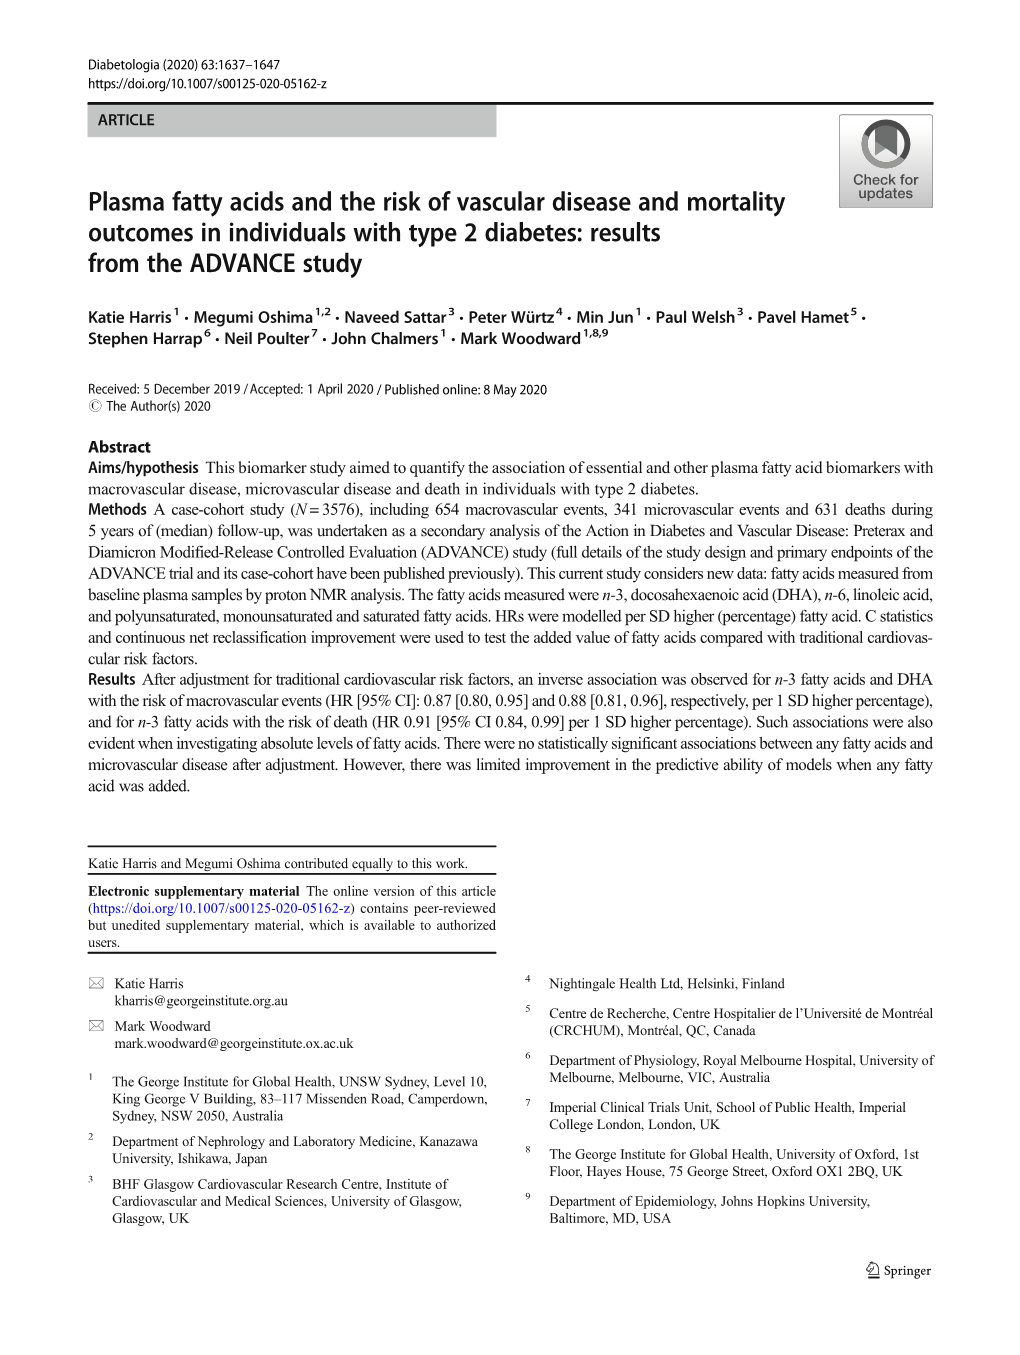 Plasma Fatty Acids and the Risk of Vascular Disease and Mortality Outcomes in Individuals with Type 2 Diabetes: Results from the ADVANCE Study